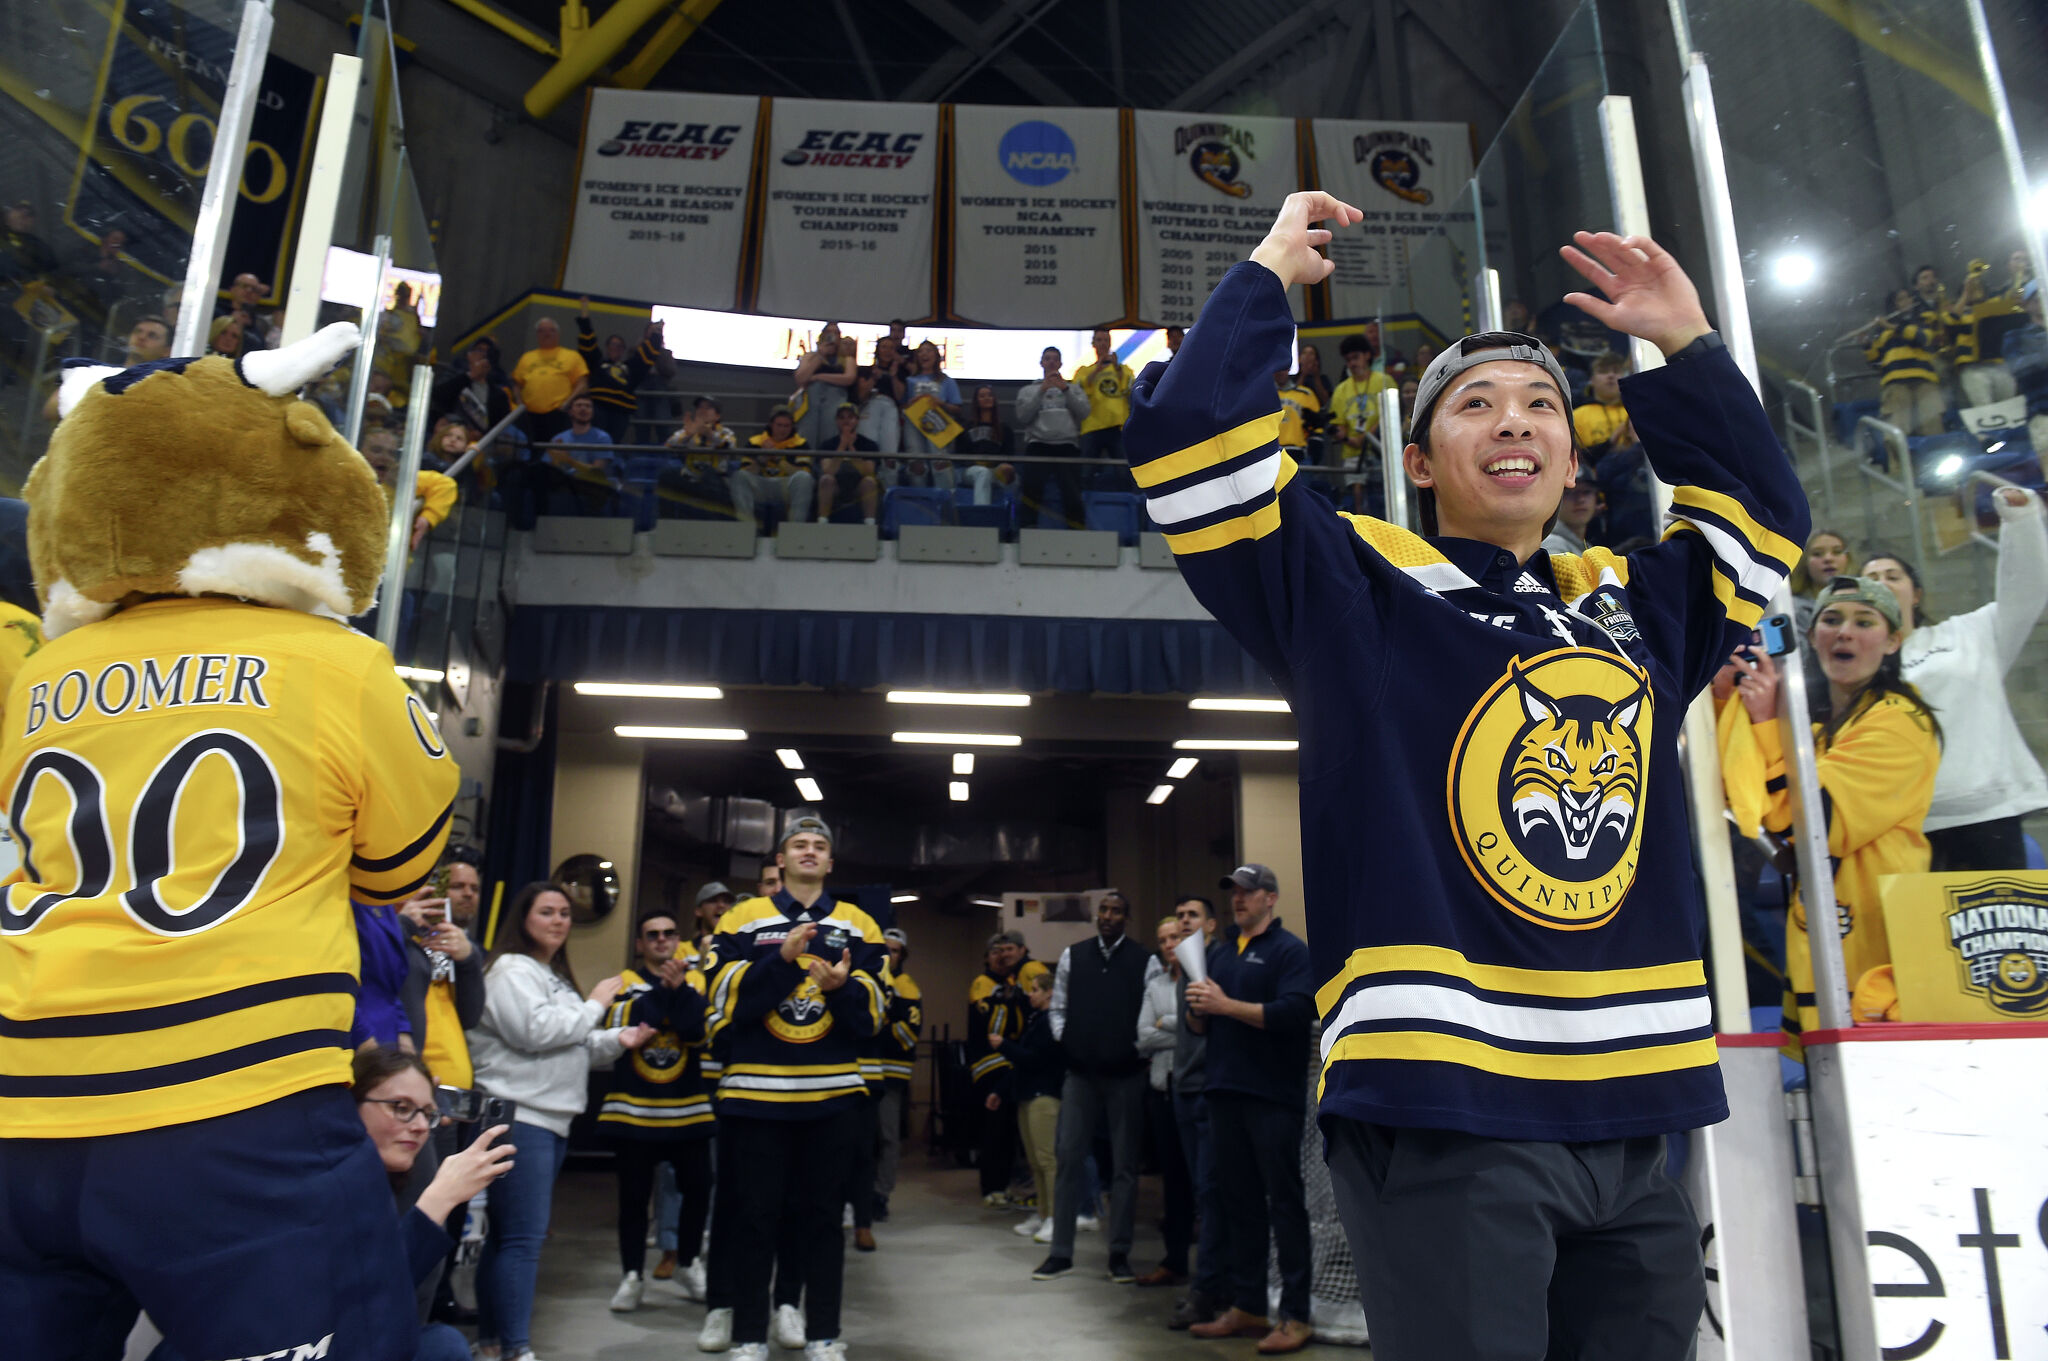 Frozen Four: Quinnipiac newcomers mix with experience, culture